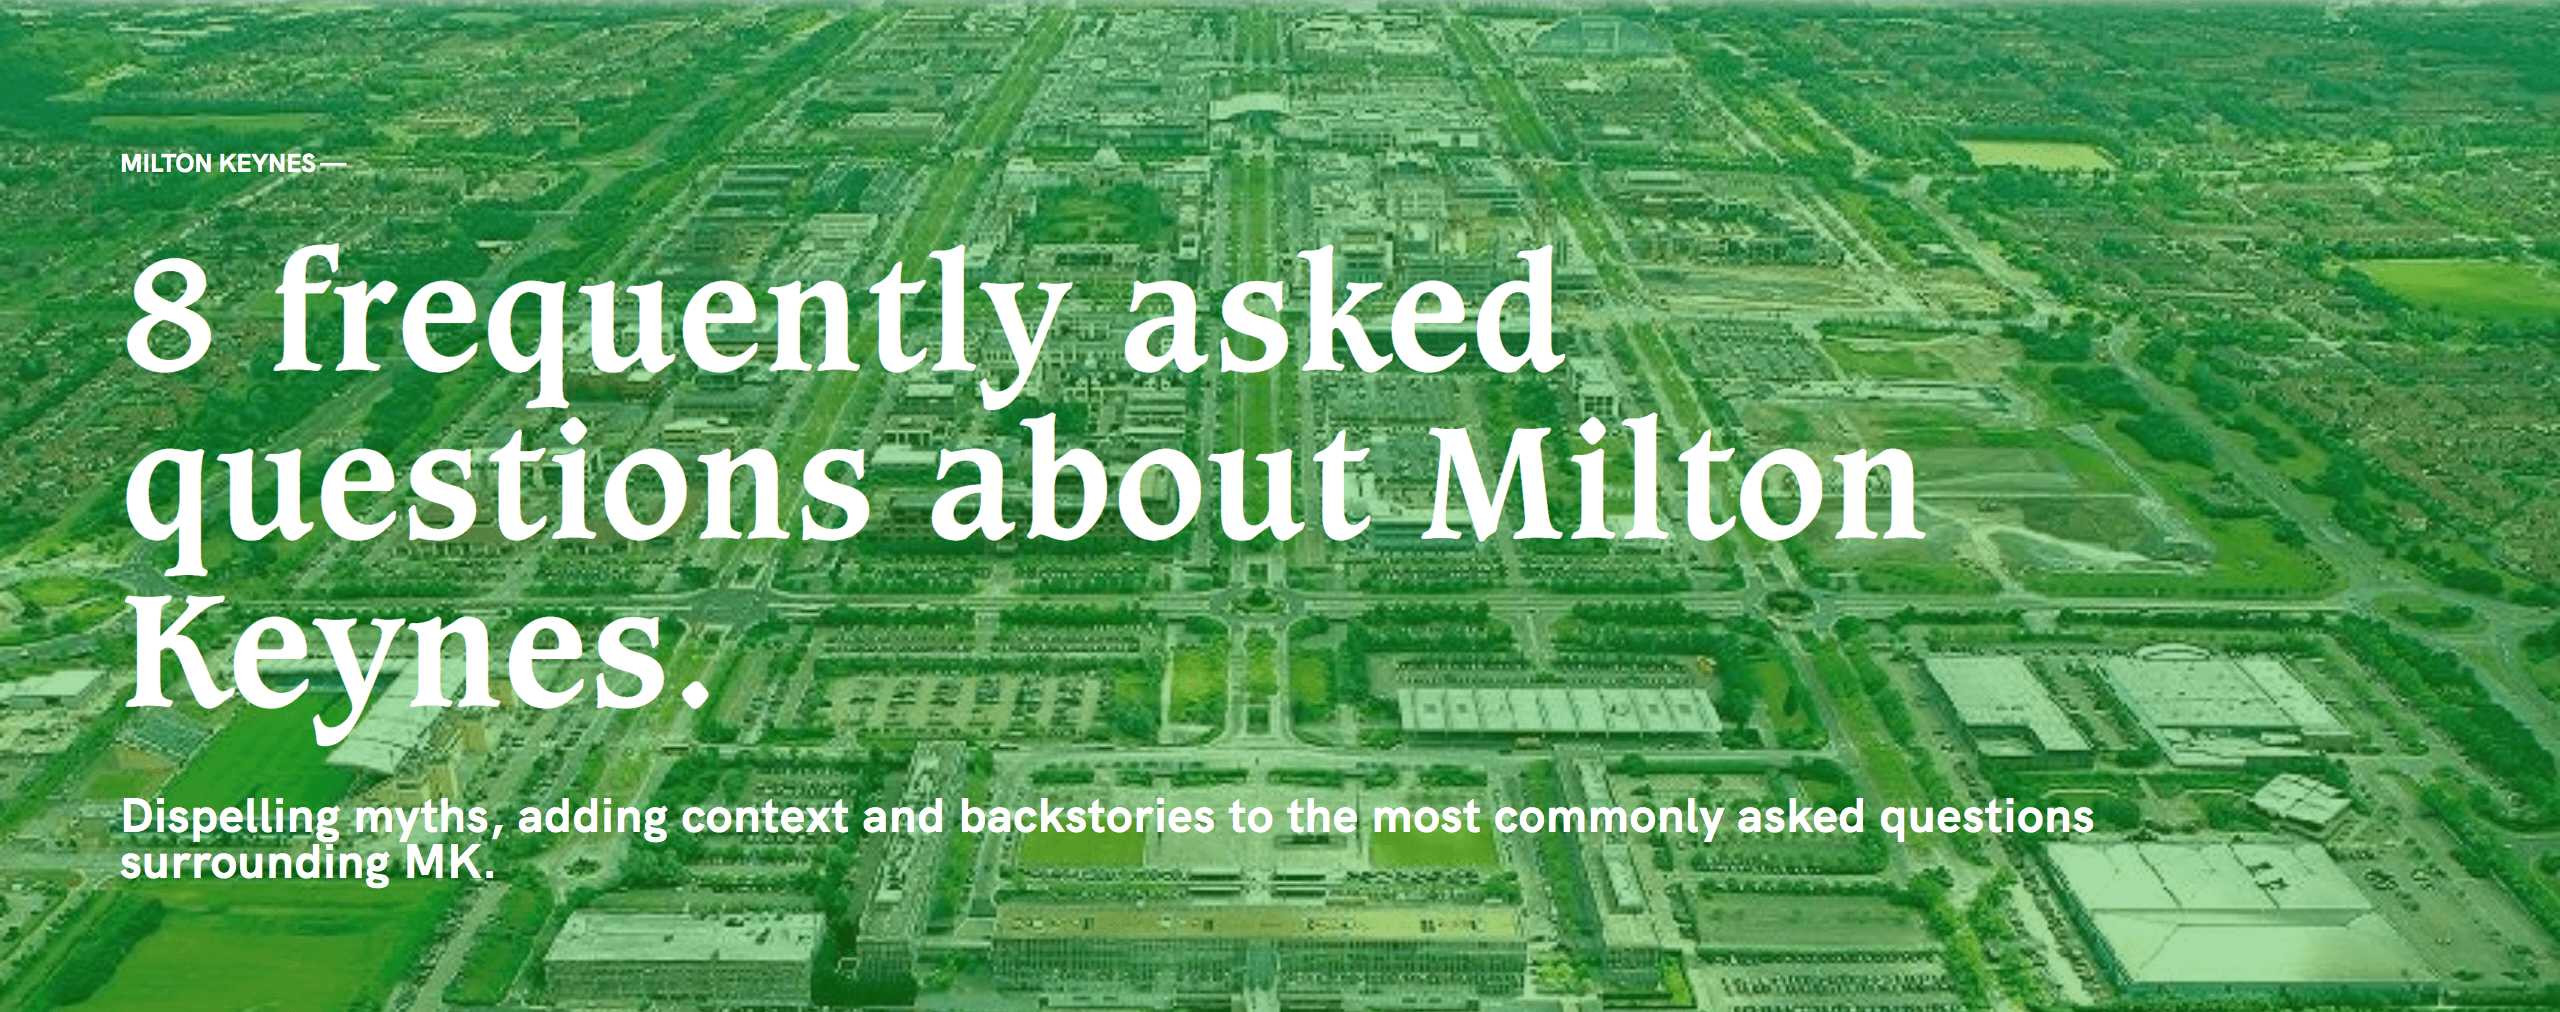 milton keynes frequently asked questions cover image